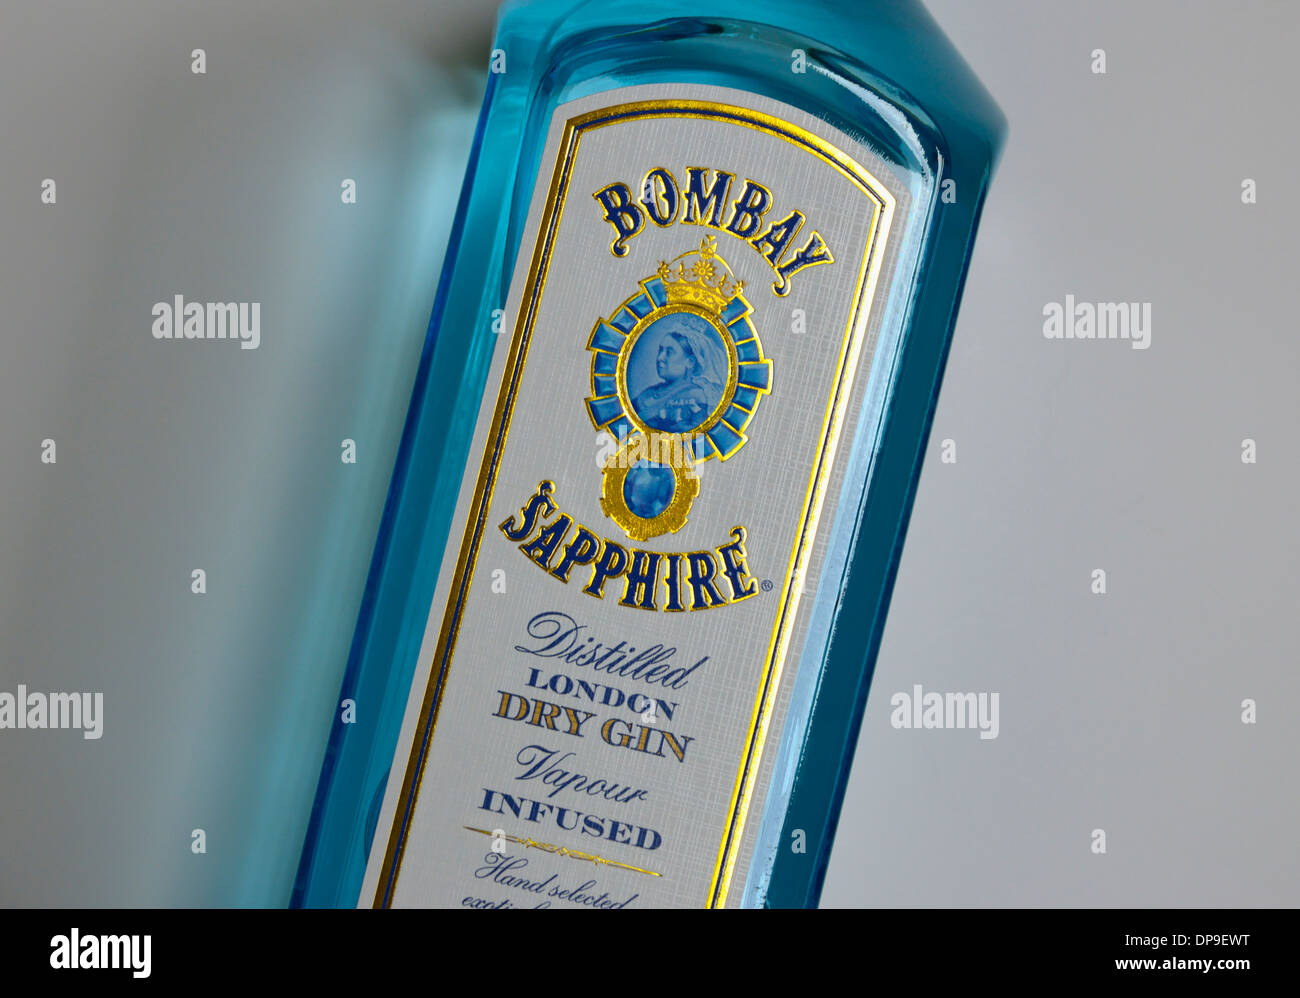 Bombay Sapphire distilled London dry gin. Vapour infused. Stock Photo